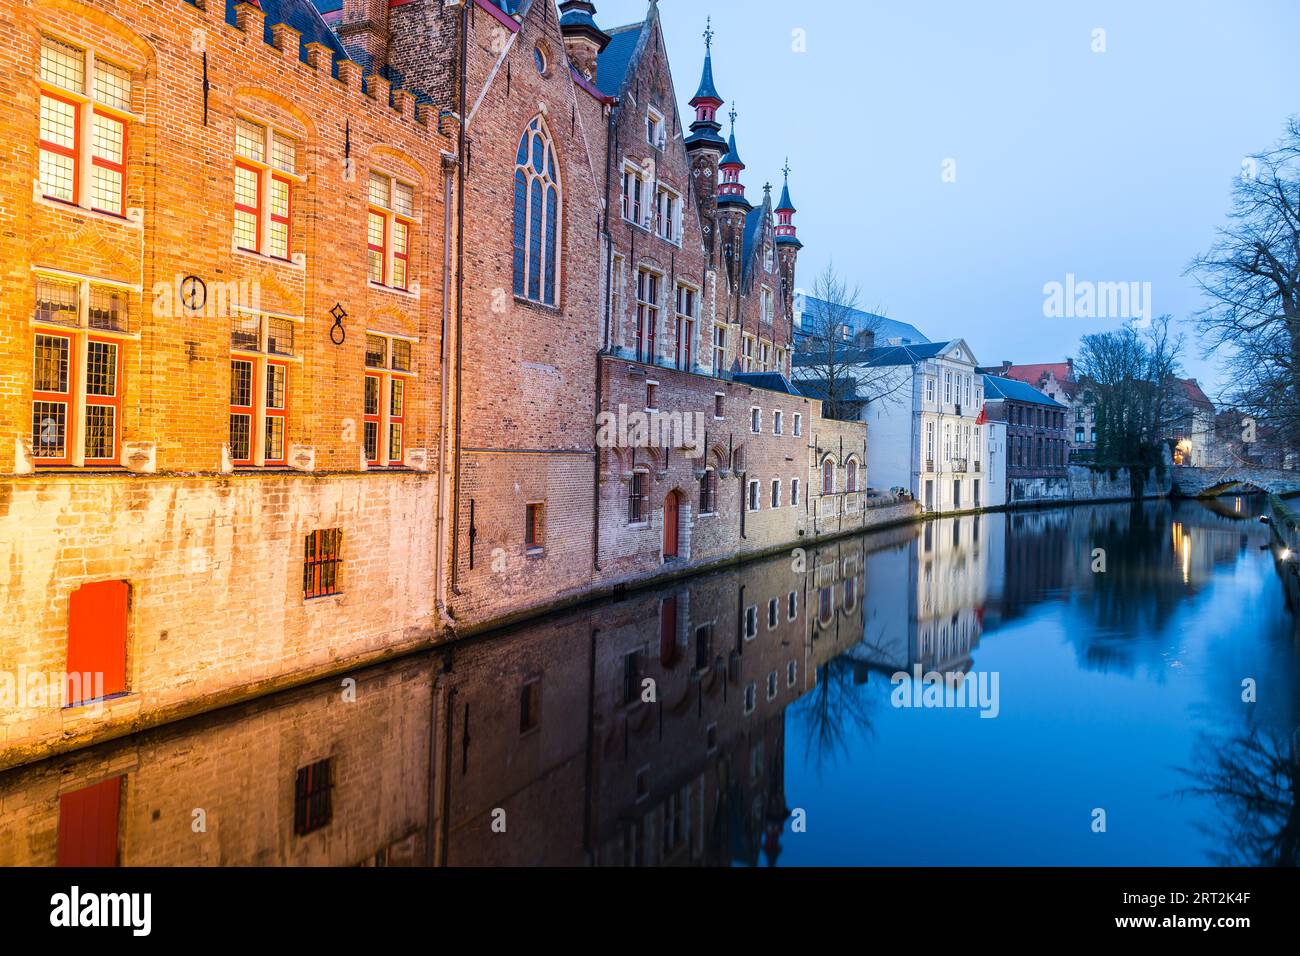 A view along the Groenerei and Steenhouwersdijk part of the Bruges canals at twilight. The outside of buildings can be seen and reflections can be see Stock Photo